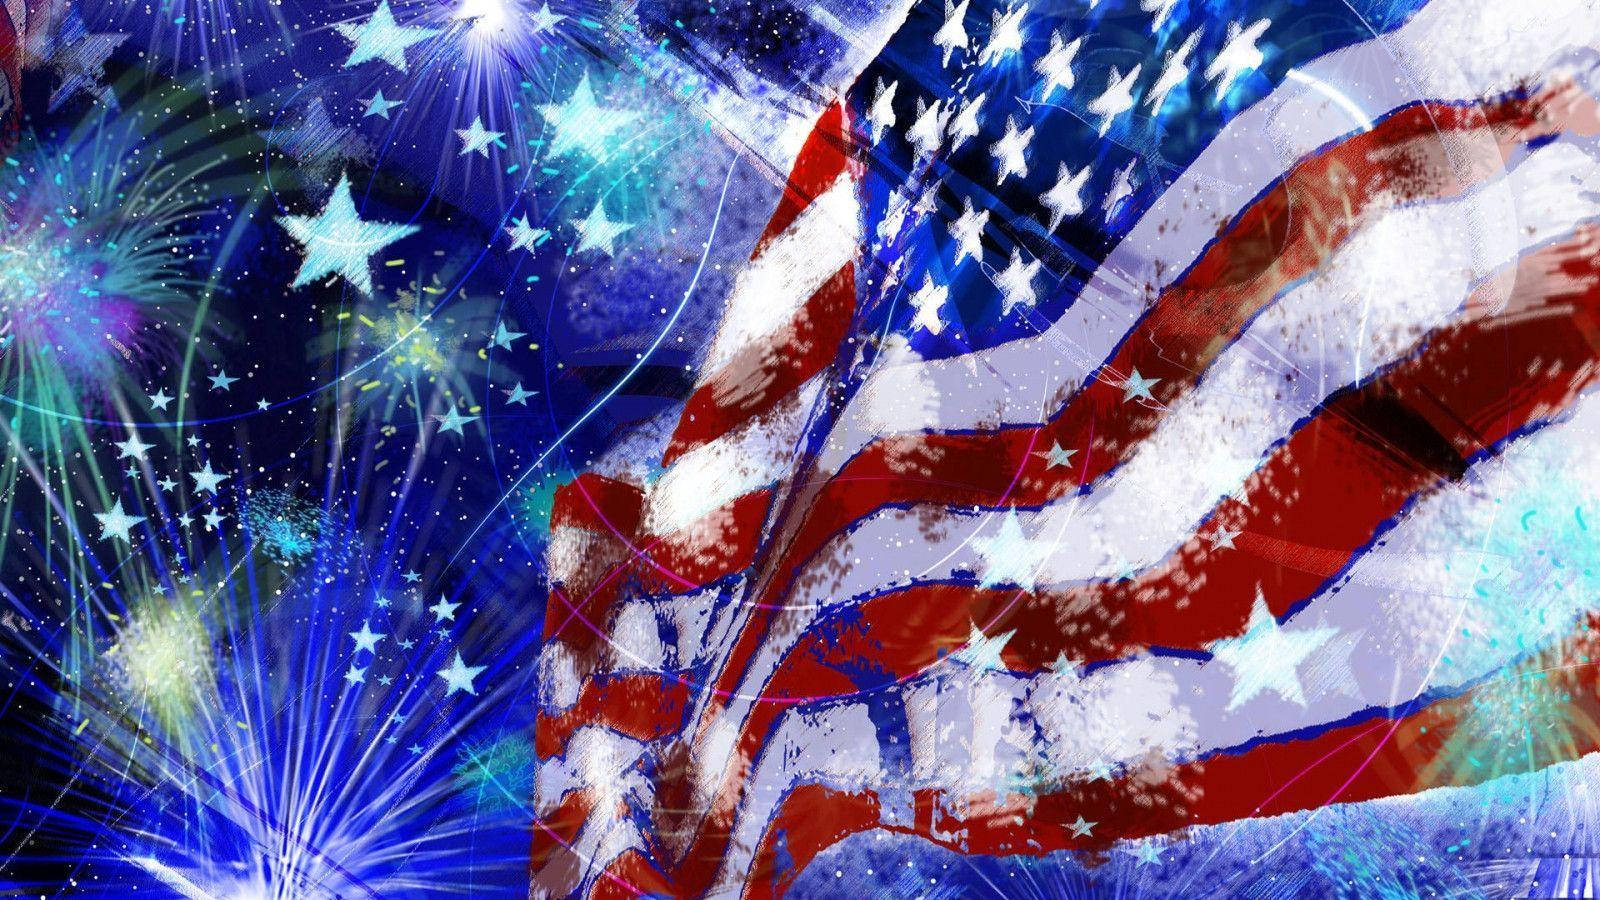 Celebrate The 4th Of July With This Festive Background! Wallpaper